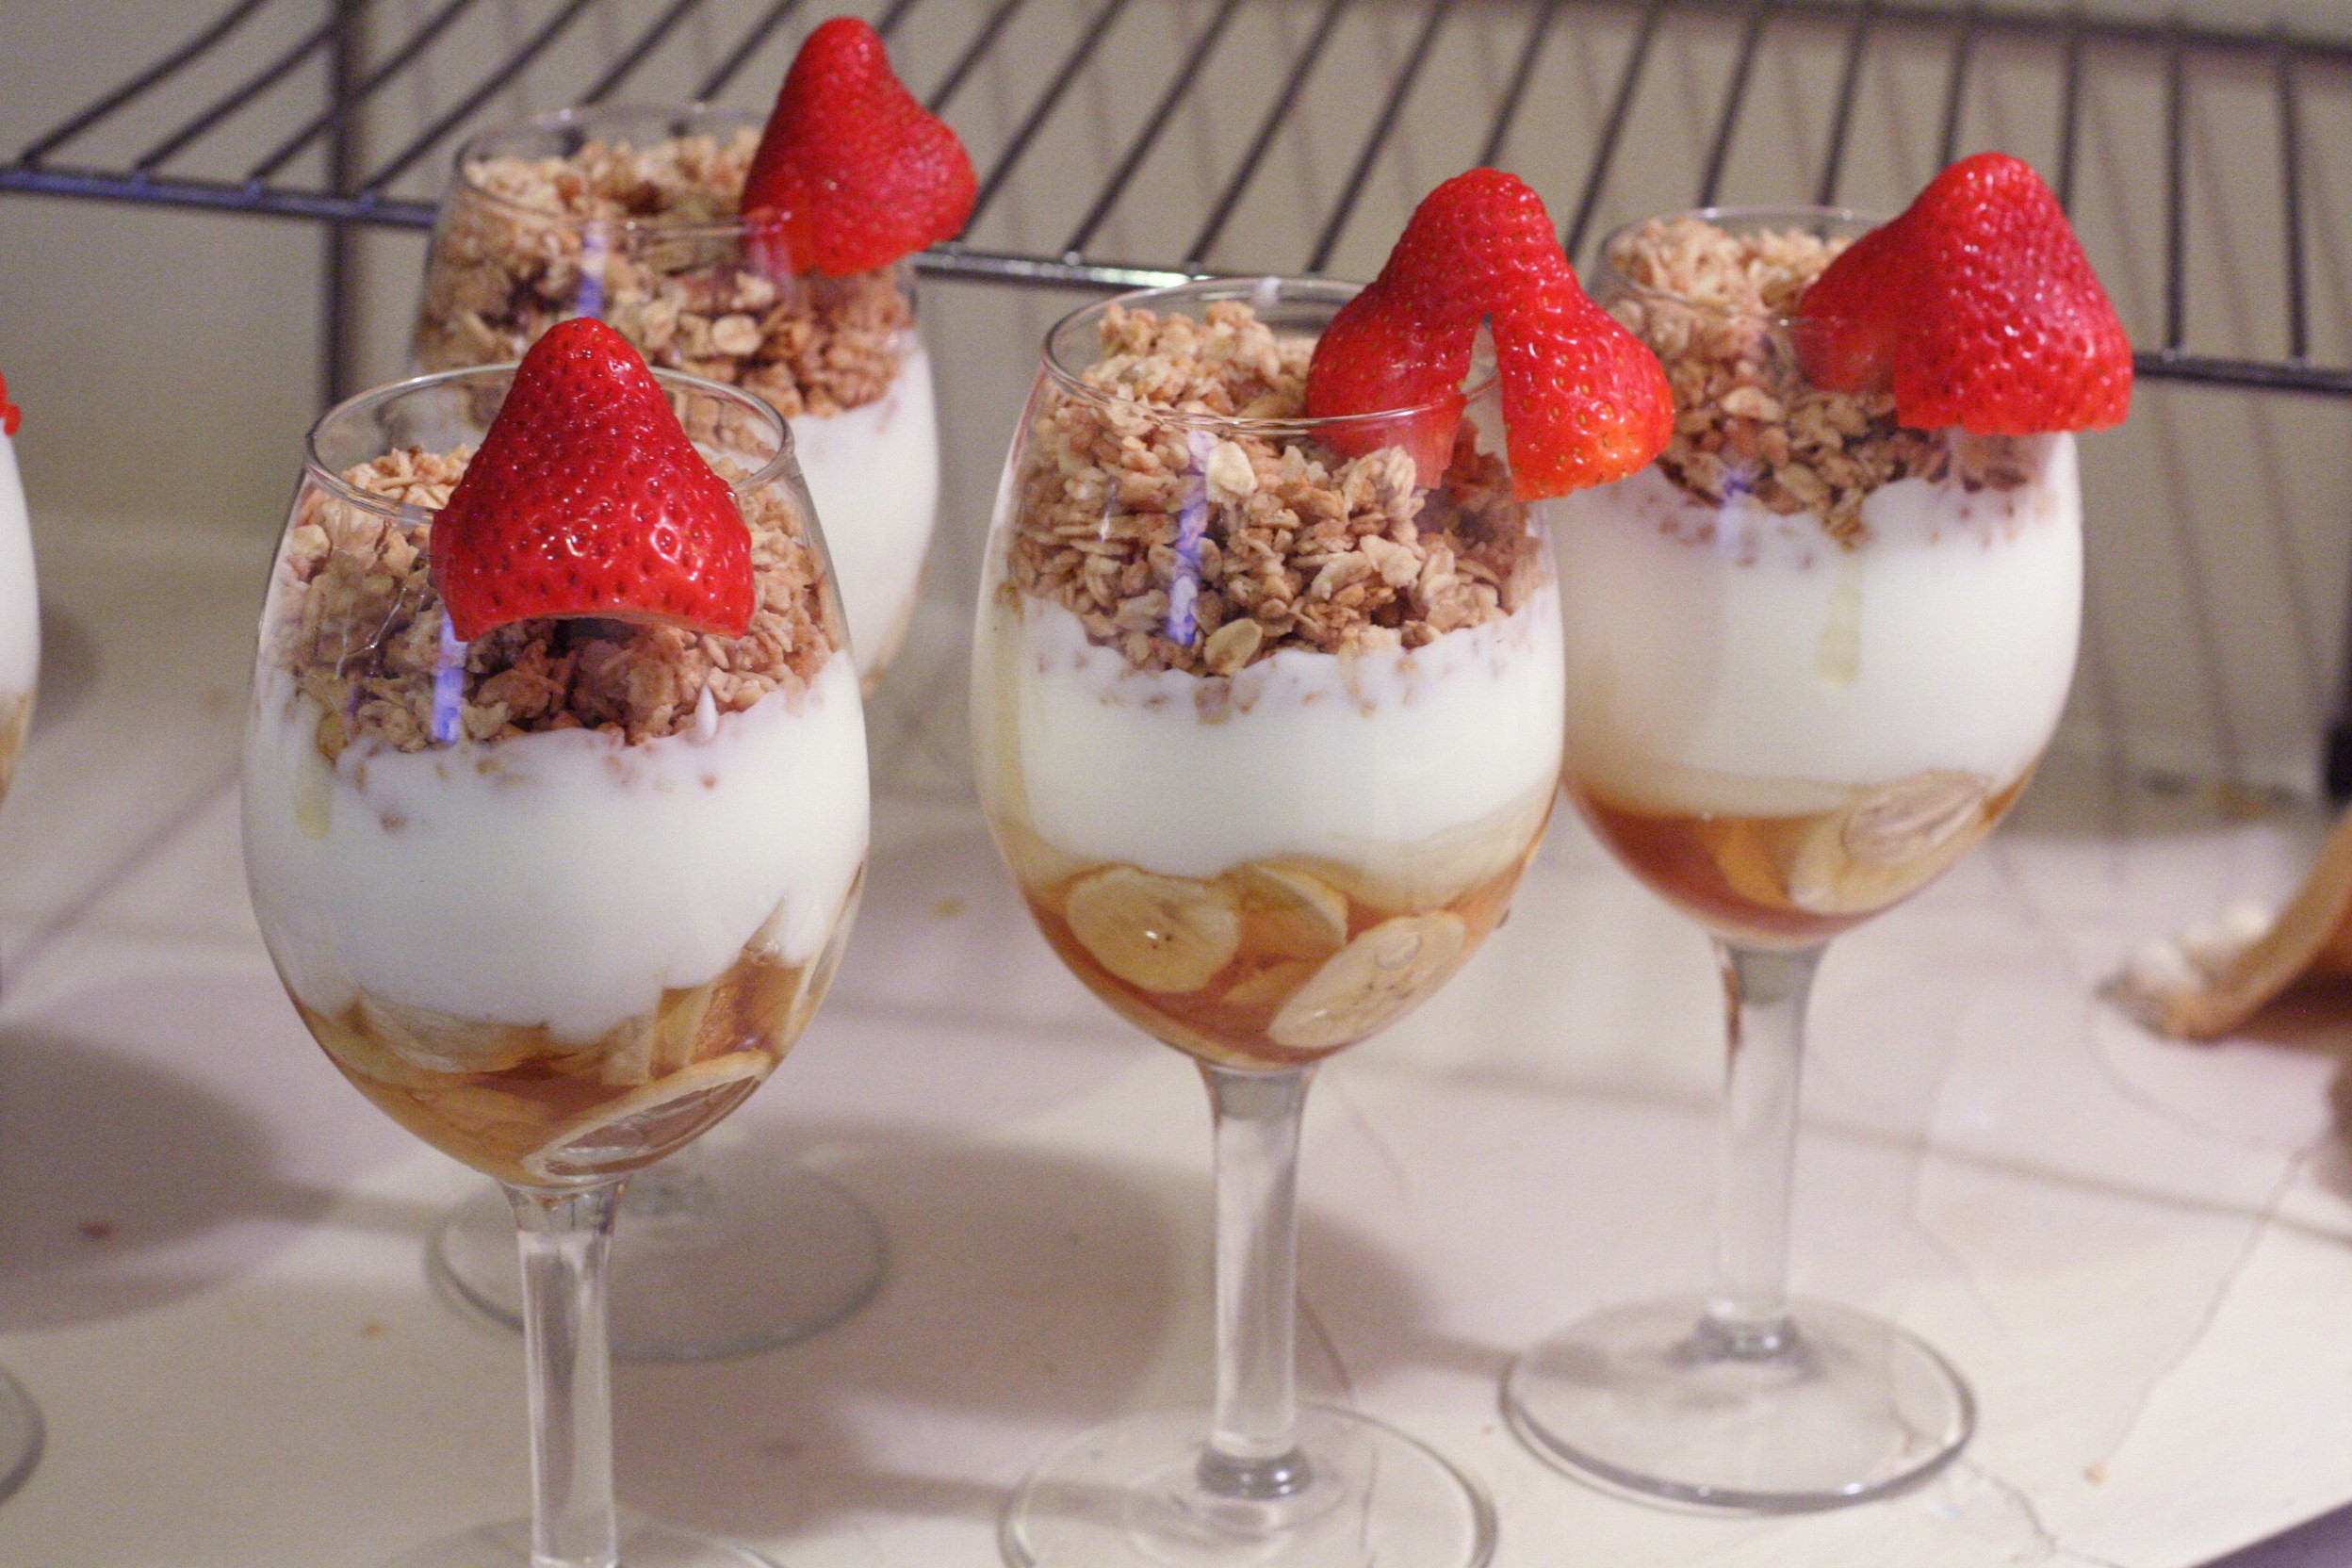 Brunch Food Ideas For A Party
 An Elaborate Sunday Brunch – Eggs Parfaits Cakes and